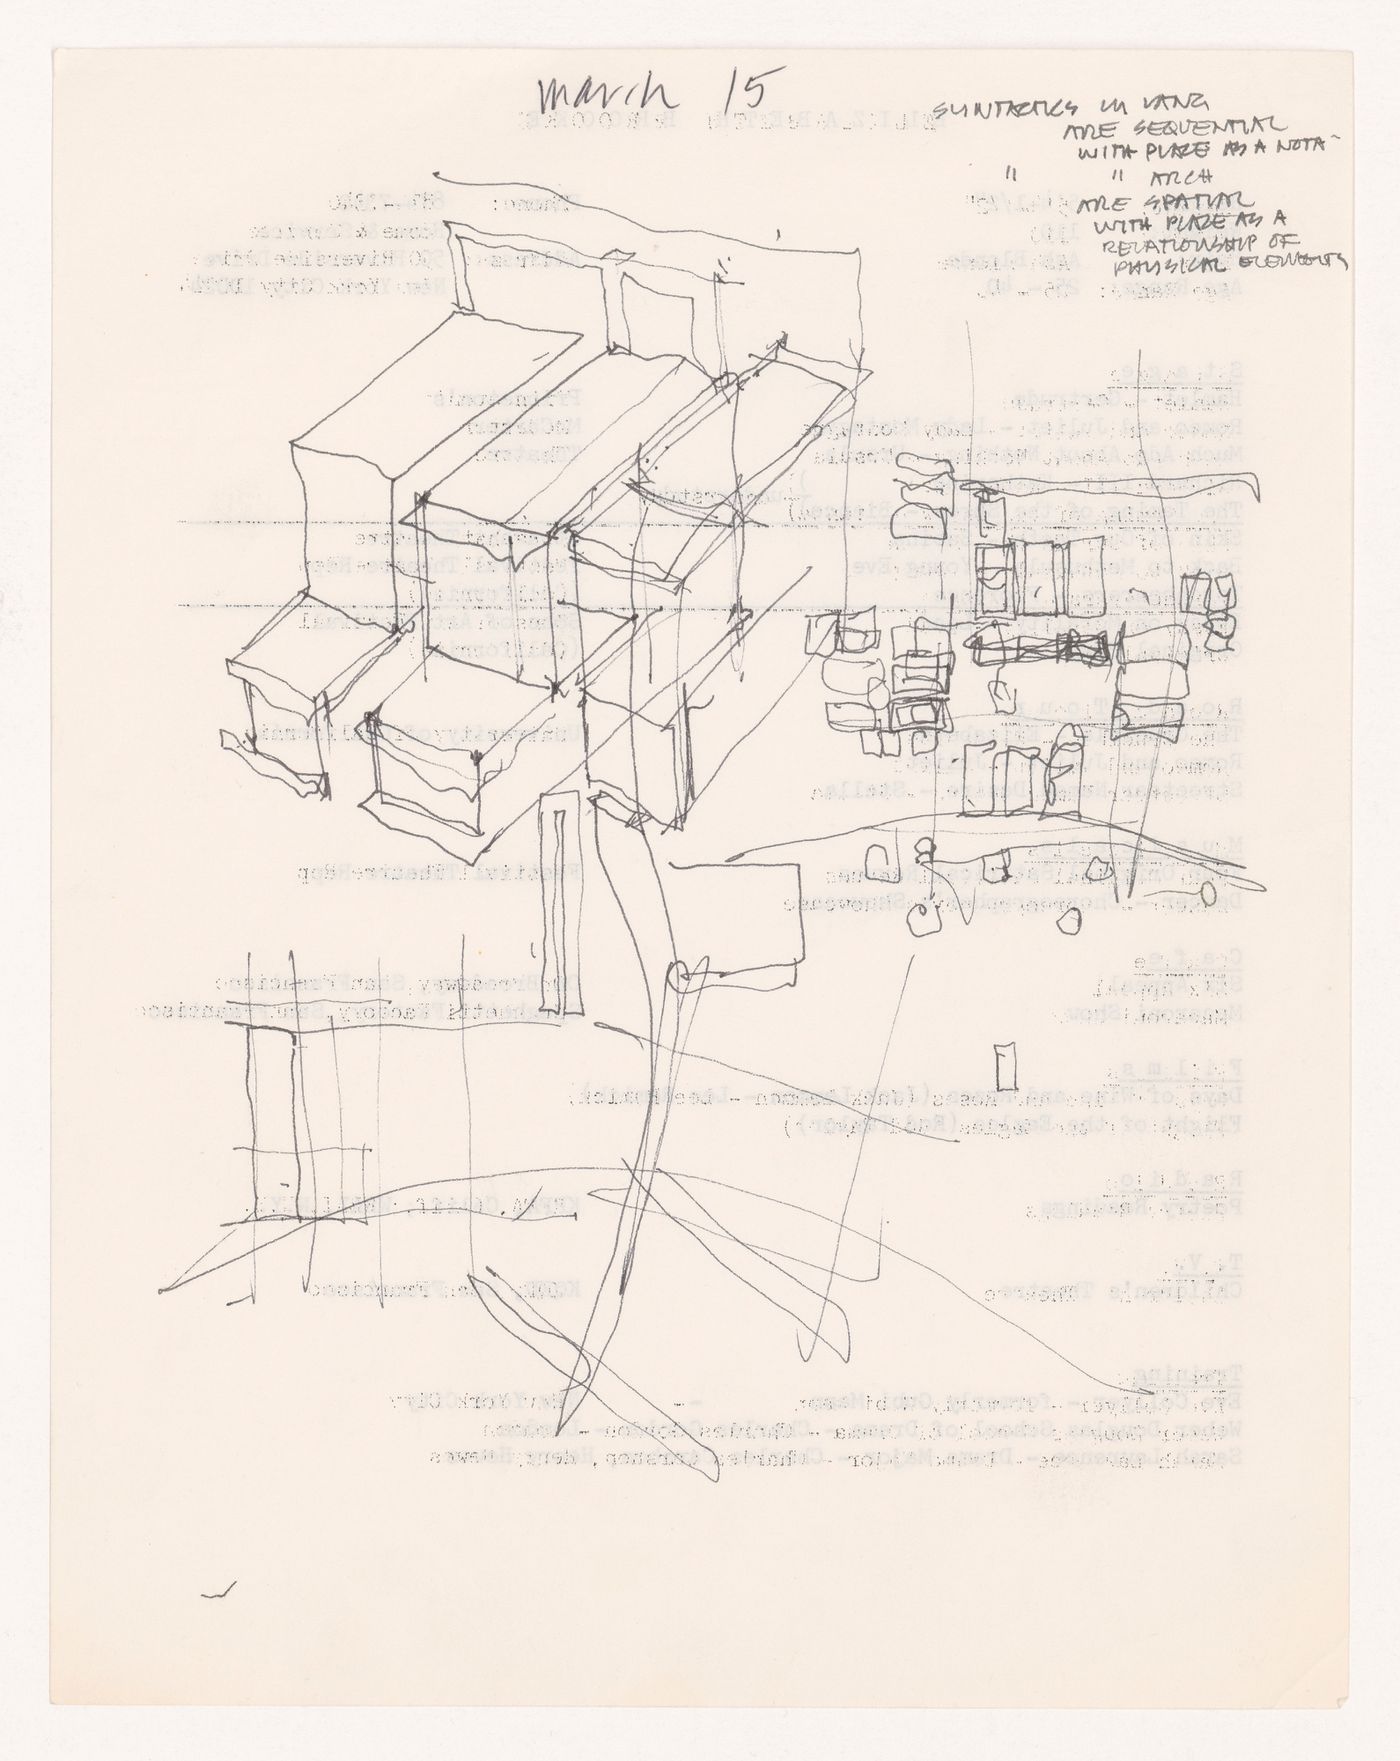 Sketches and notes on verso of text document for House VI, Cornwall, Connecticut